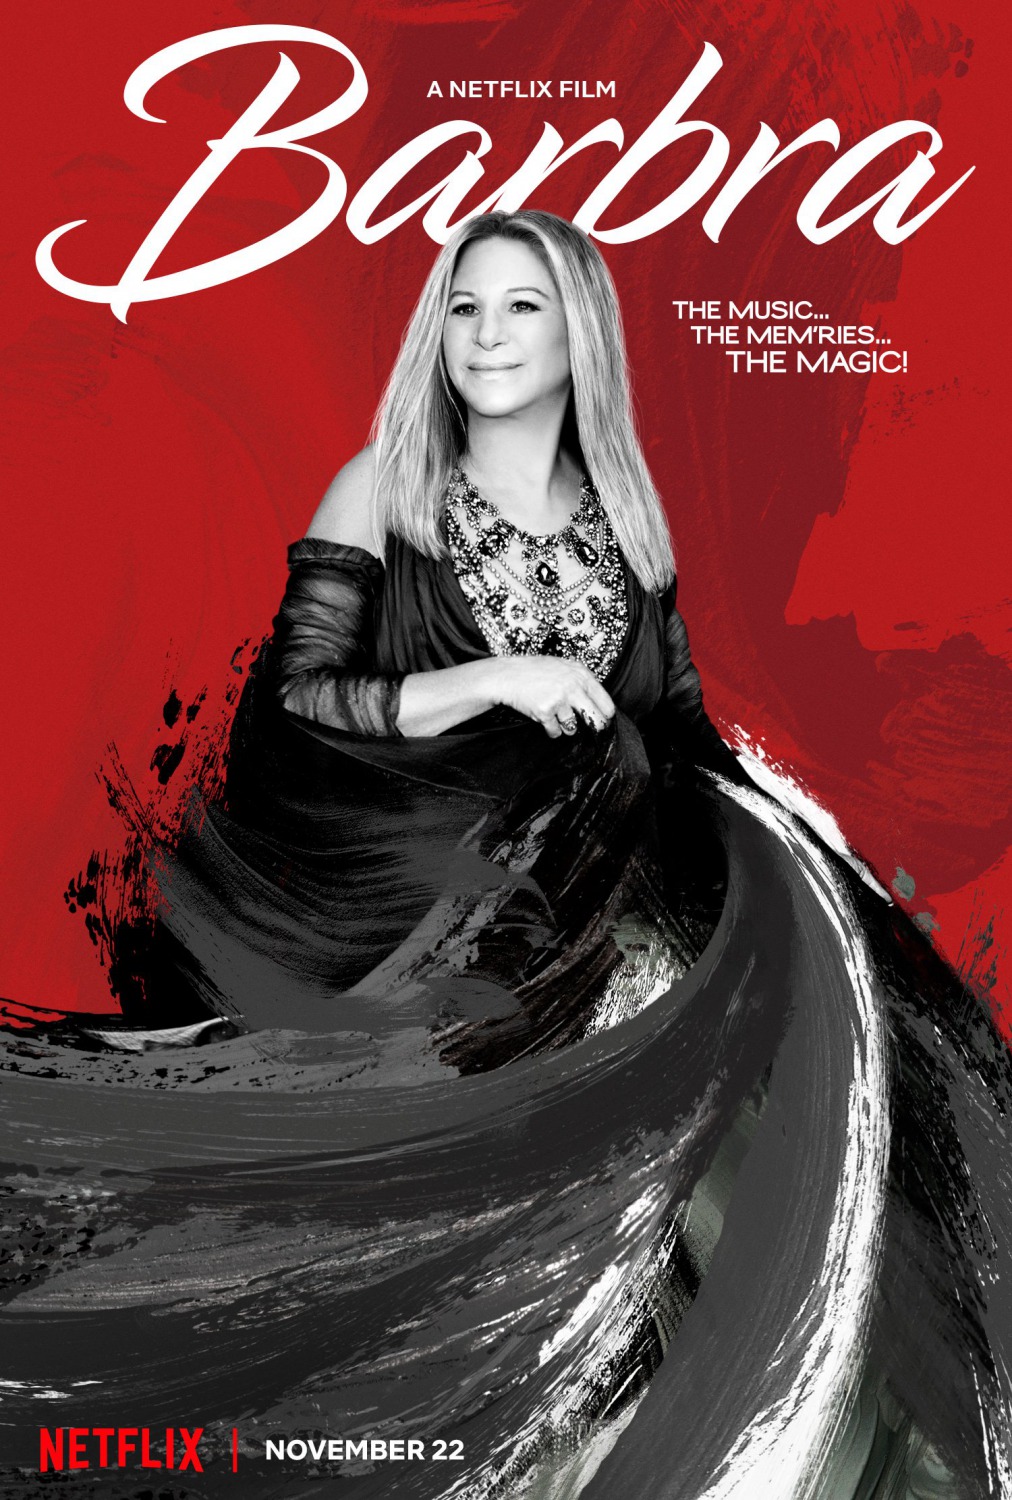 Extra Large TV Poster Image for Barbra: The Music... The Mem'ries... The Magic! 